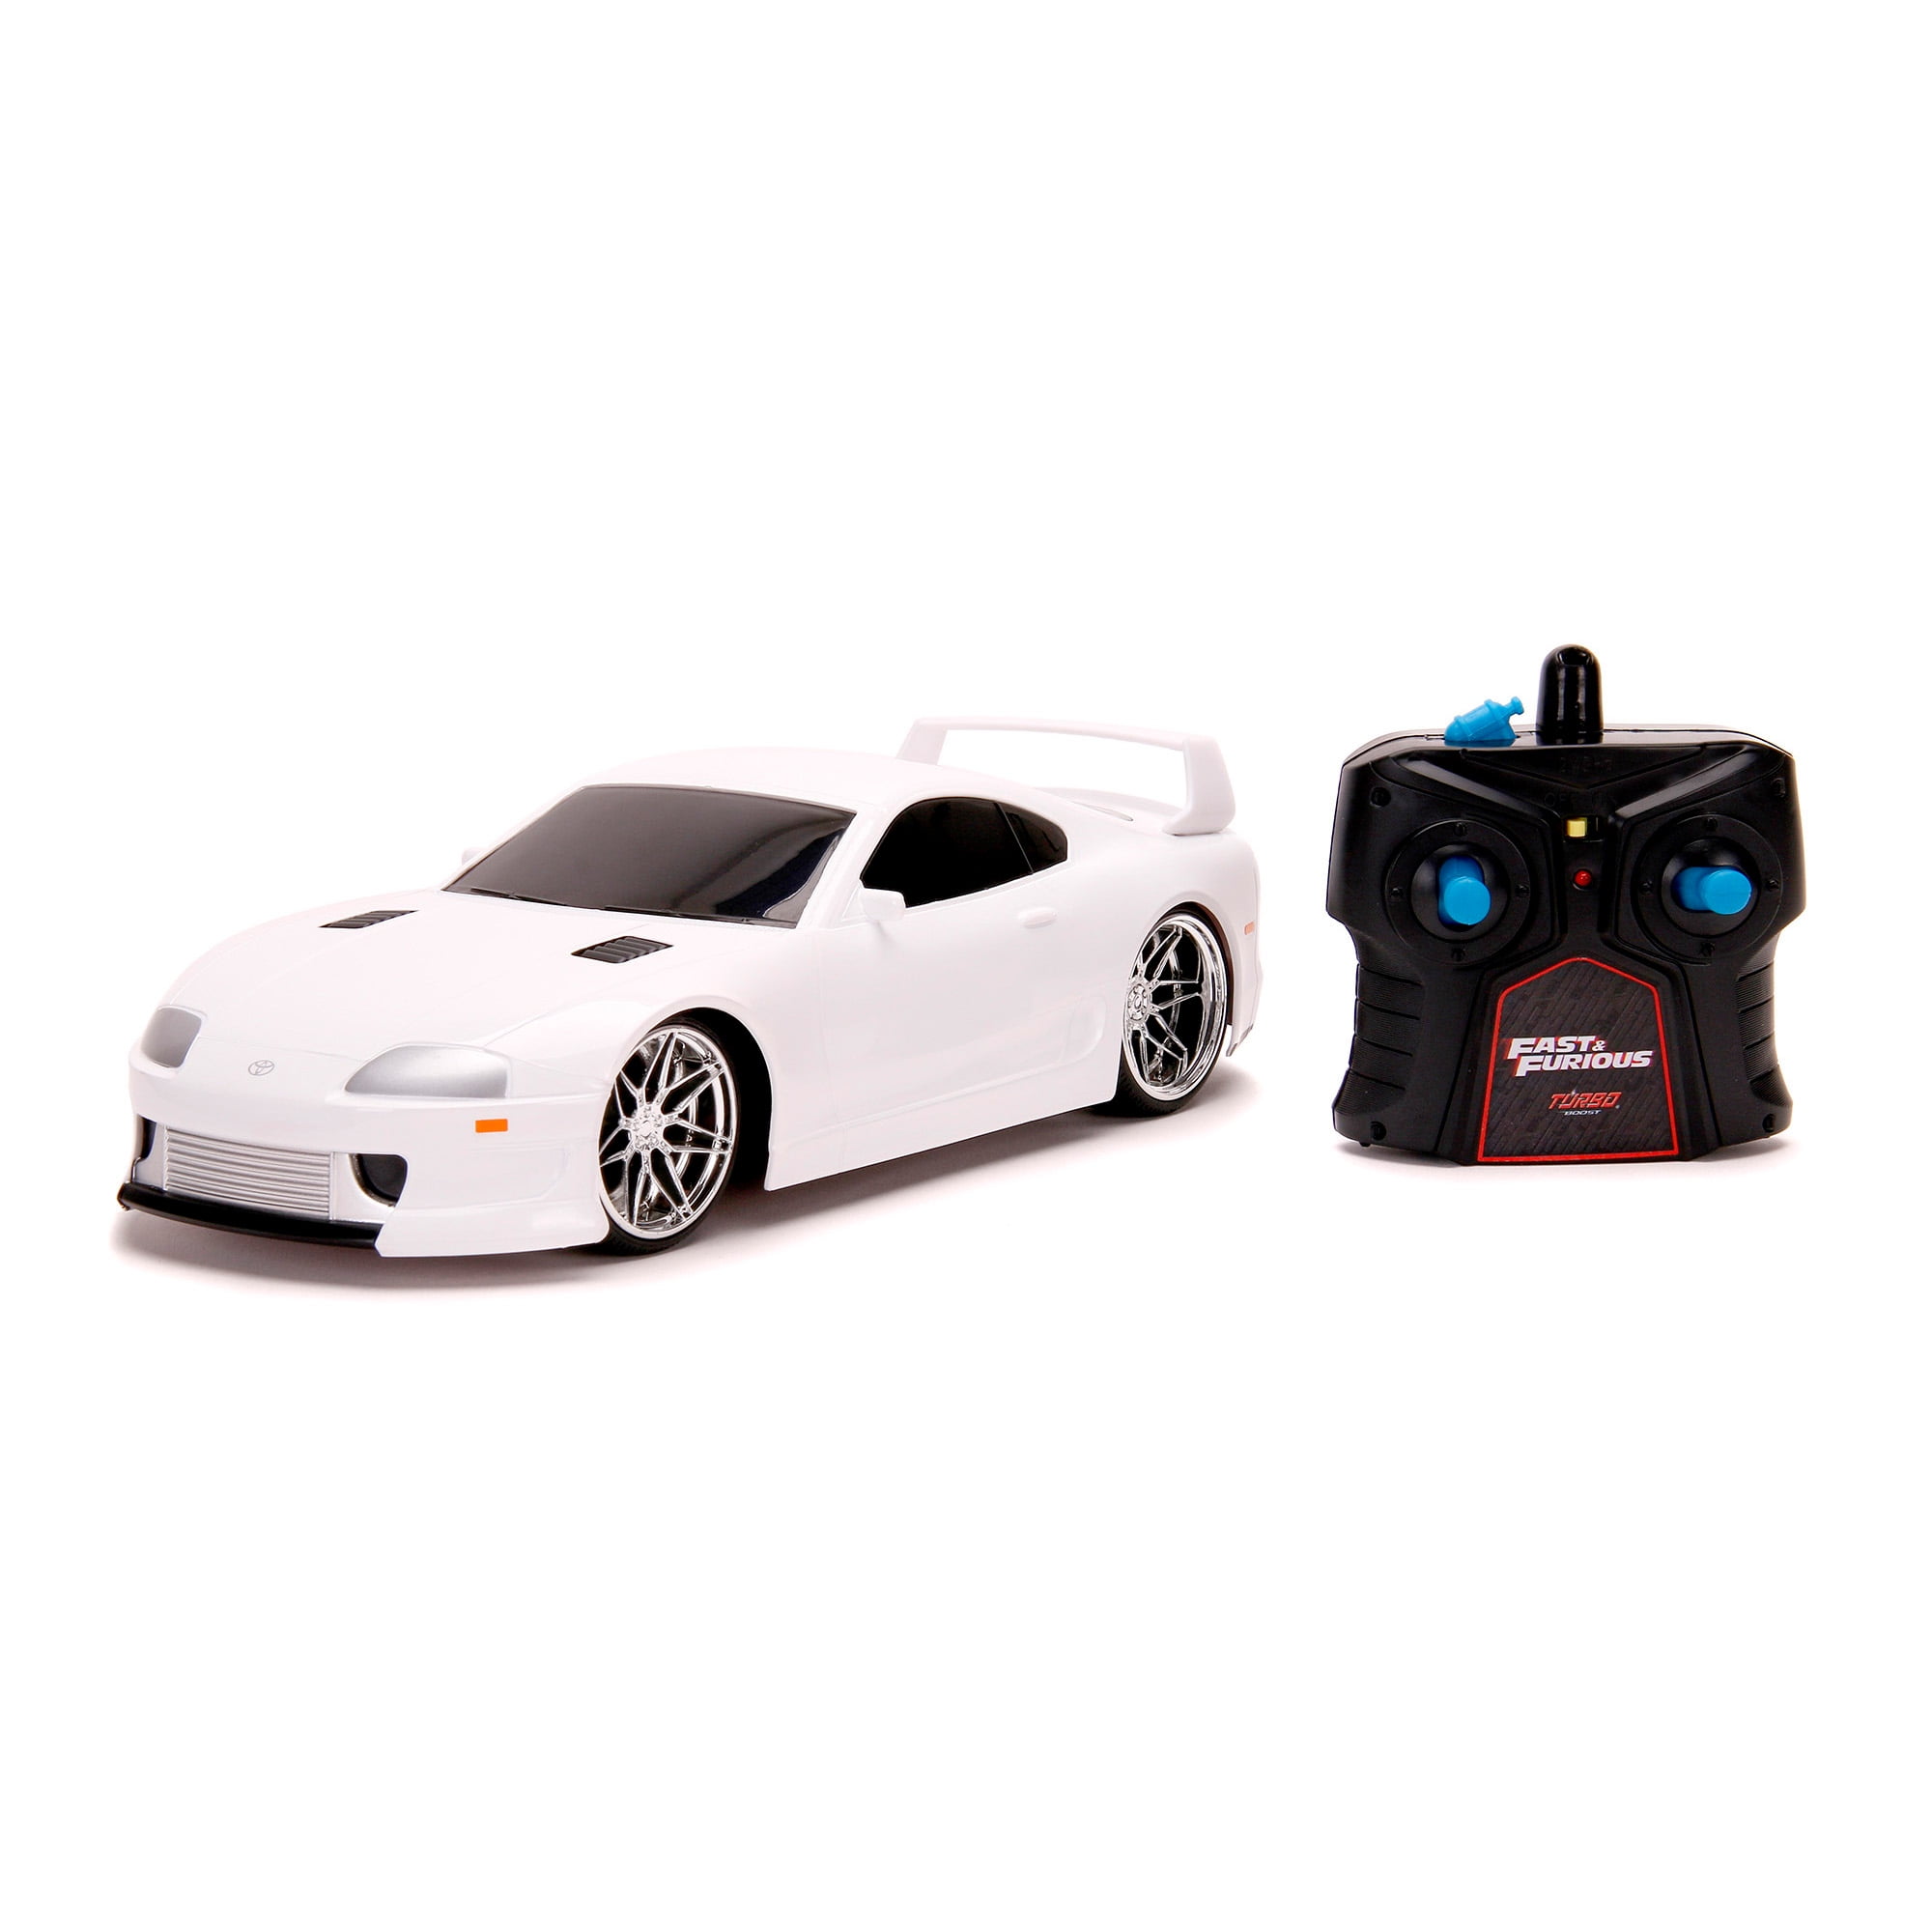 Jada 31407 Fast and Furious Brians Toyota Supra R/c Remote Controlled 1 16 for sale online 